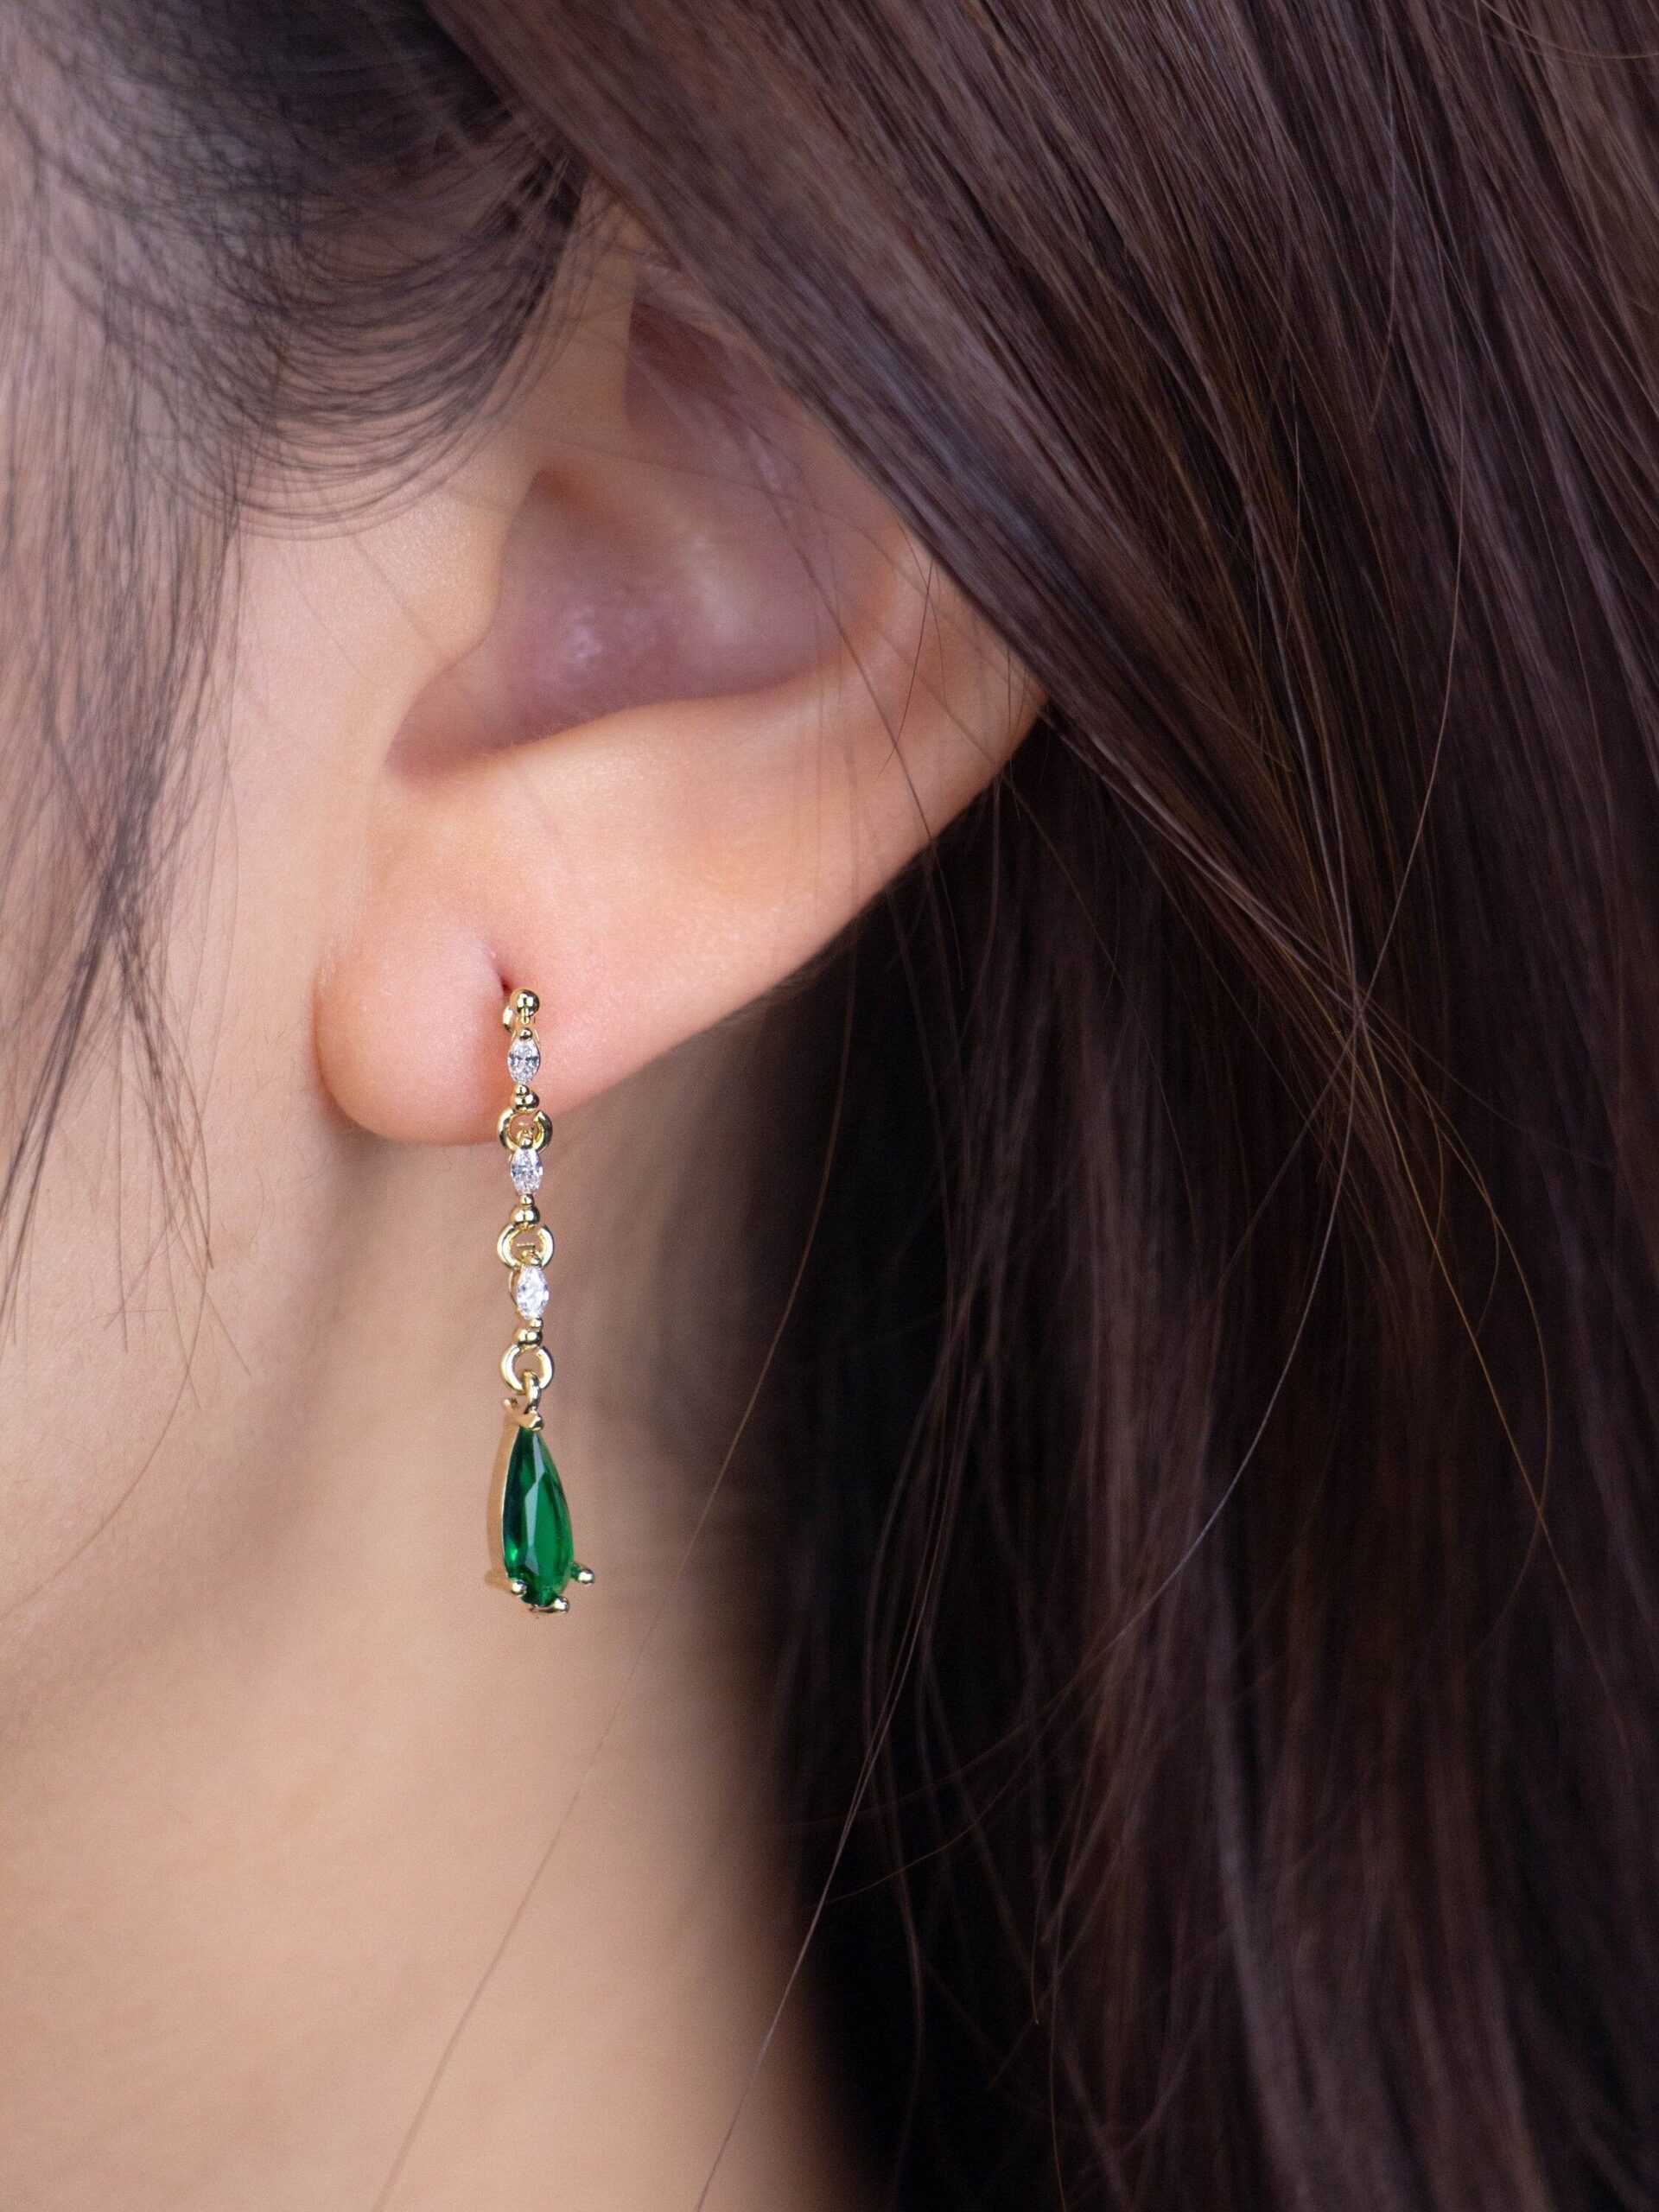 Choose Emerald earrings for making stylish personality